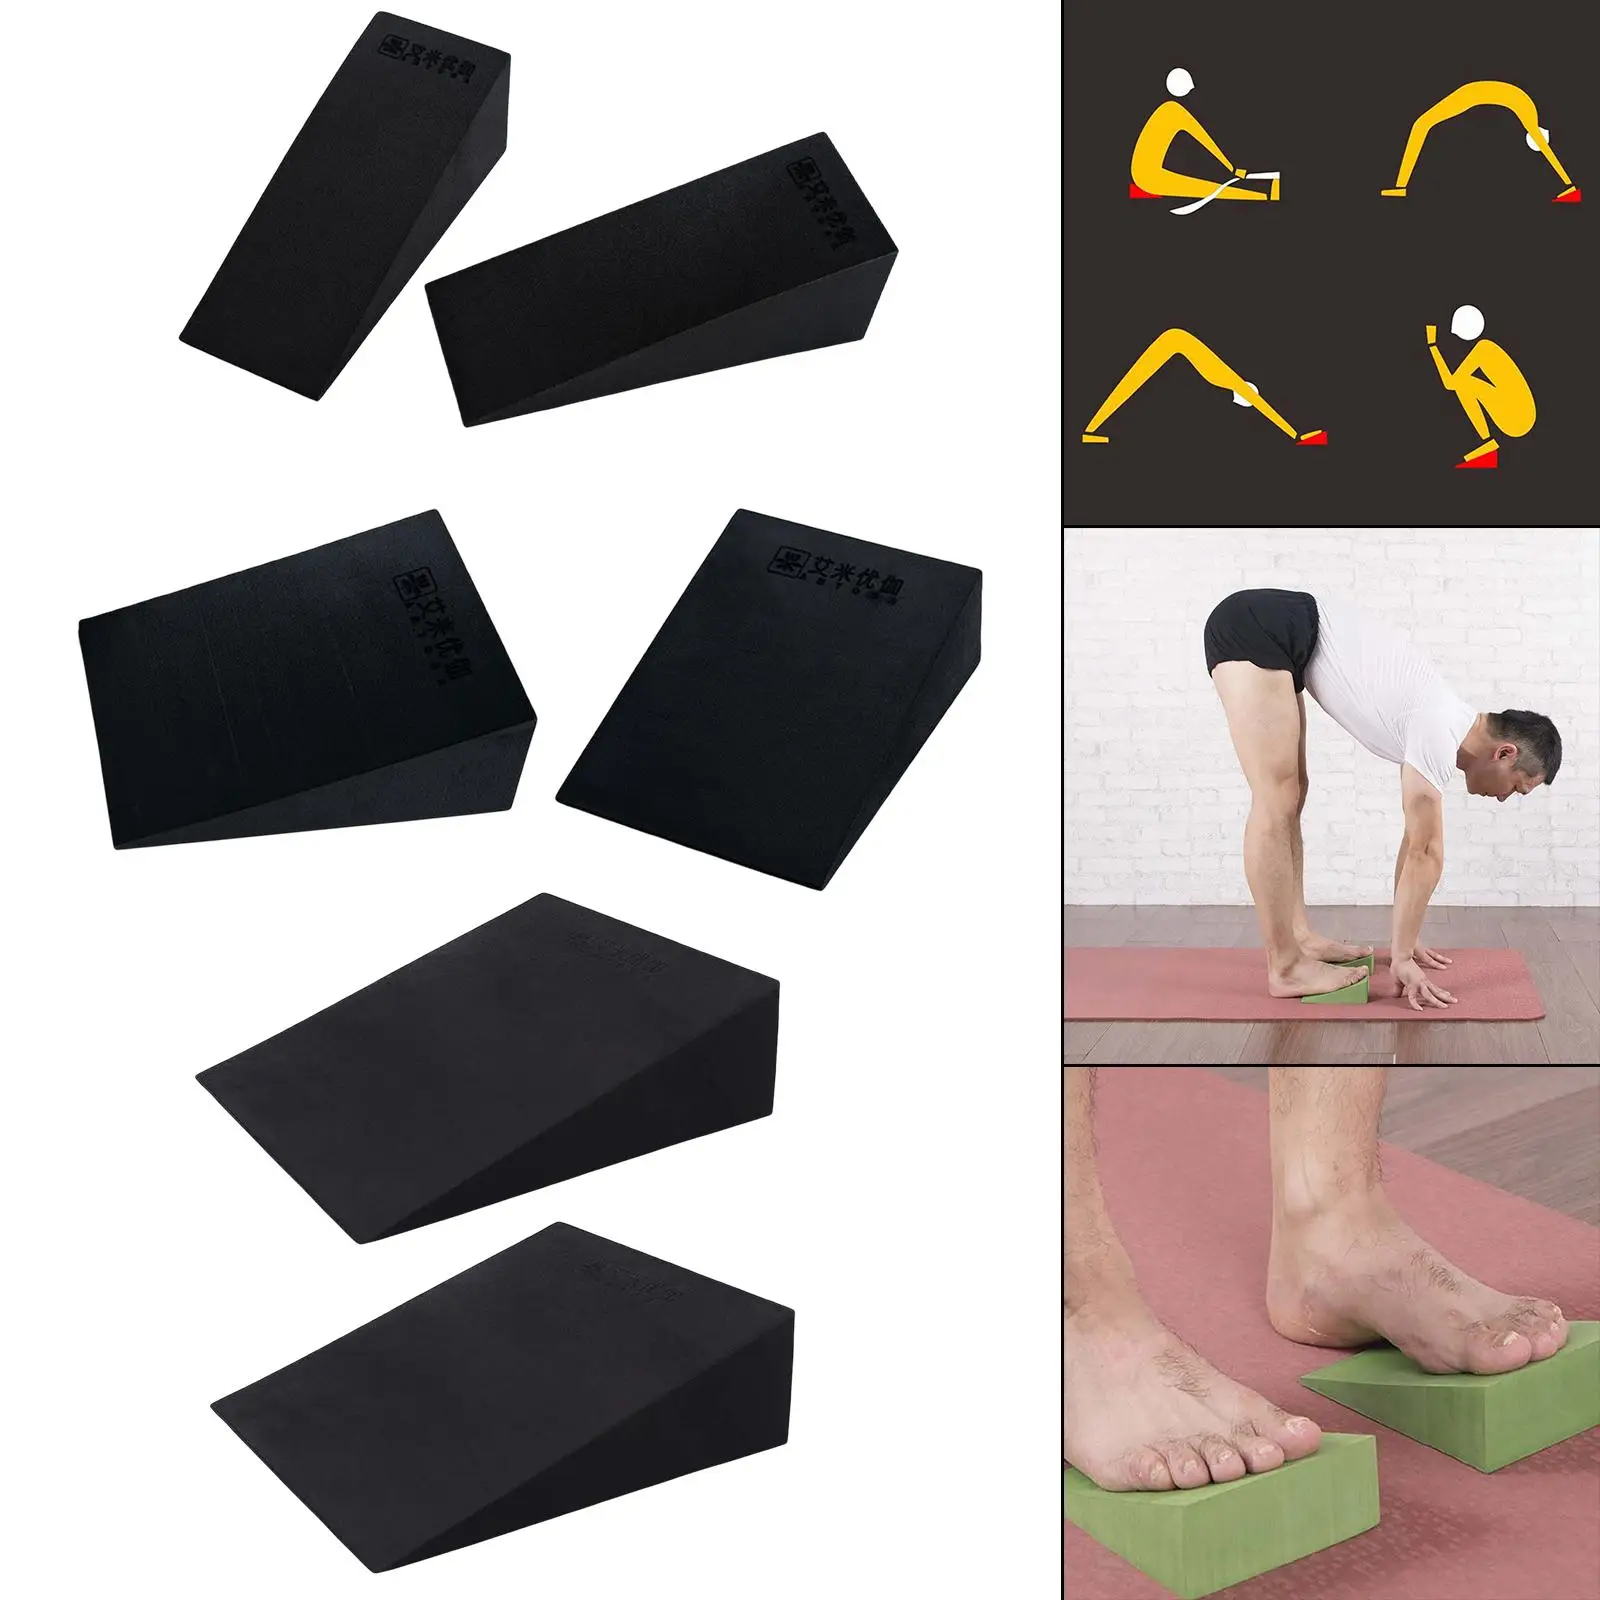 Yoga Blocks Supportive Lightweight Accessories Slant Board for Gym Stretching